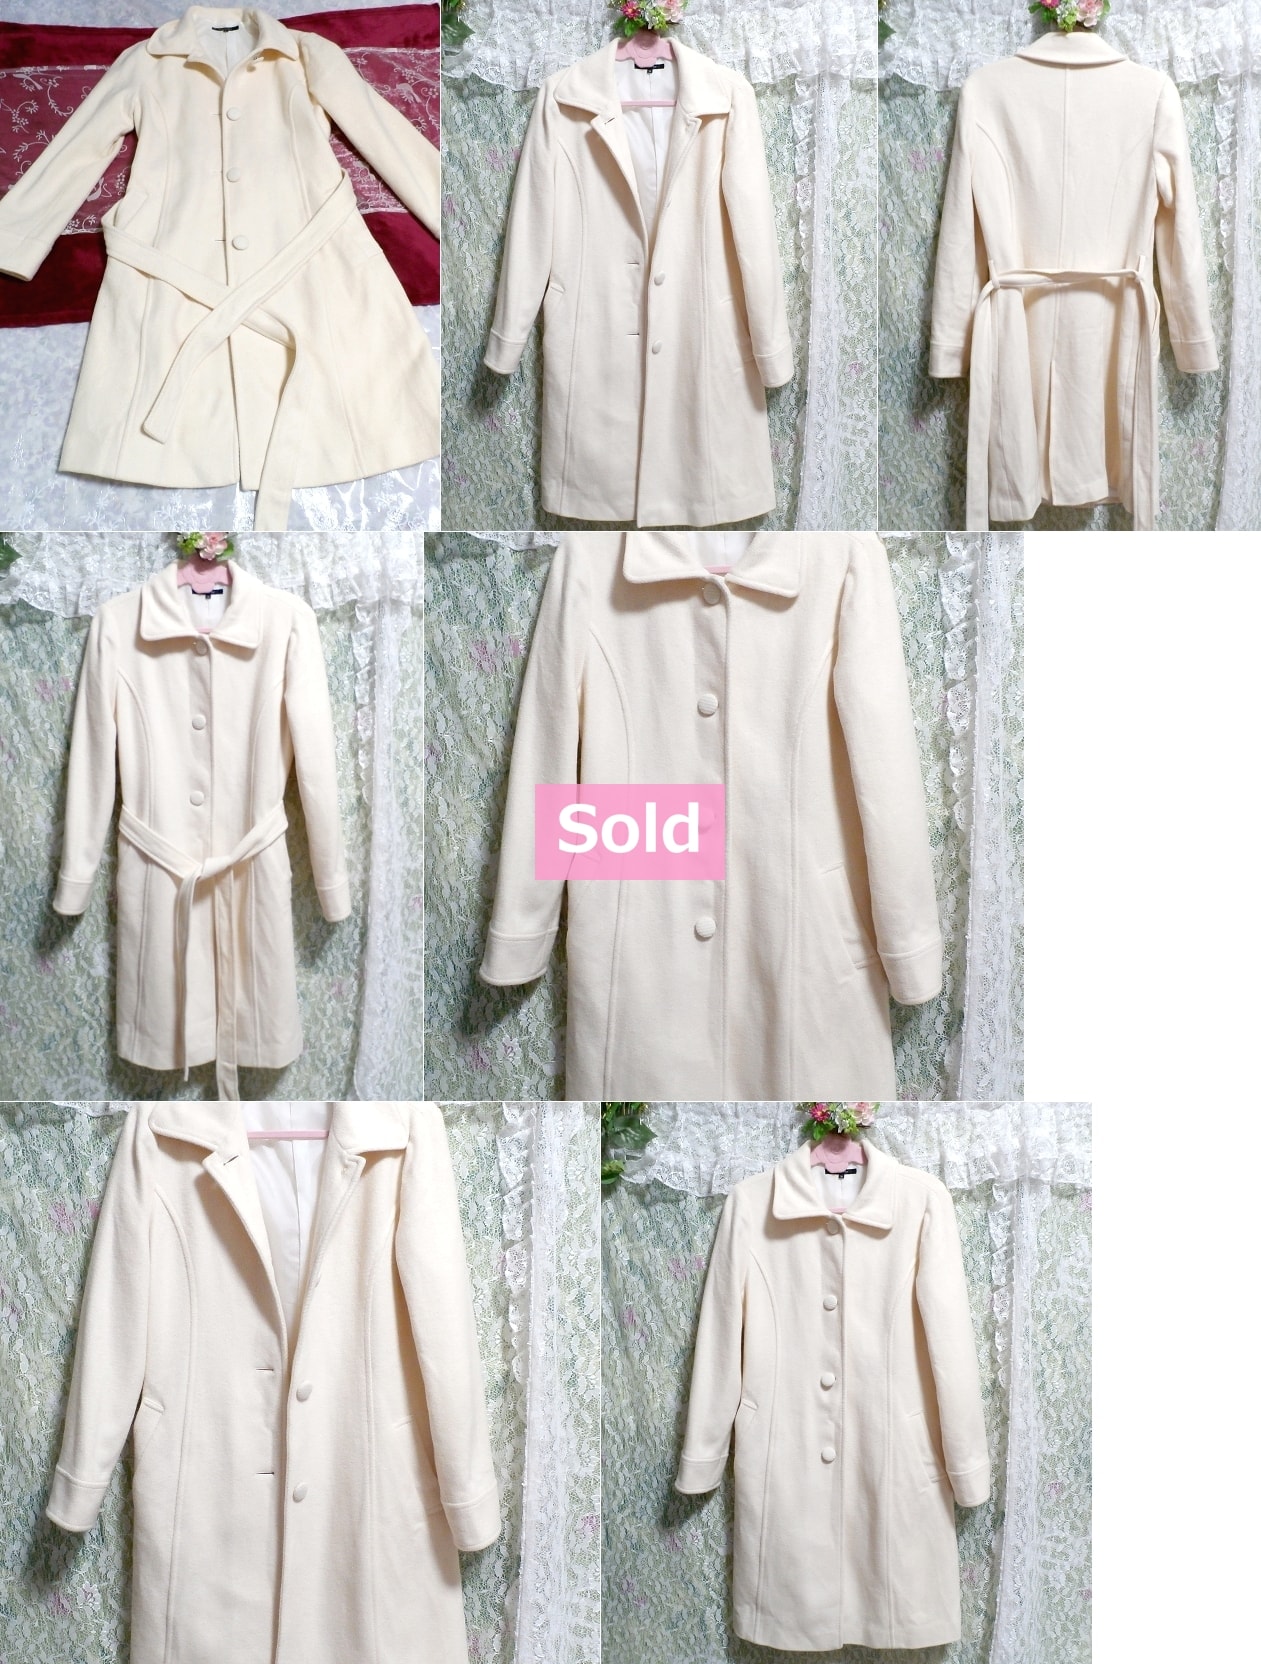 Floral white wool angola long coat / outer, coat & coat general & M size